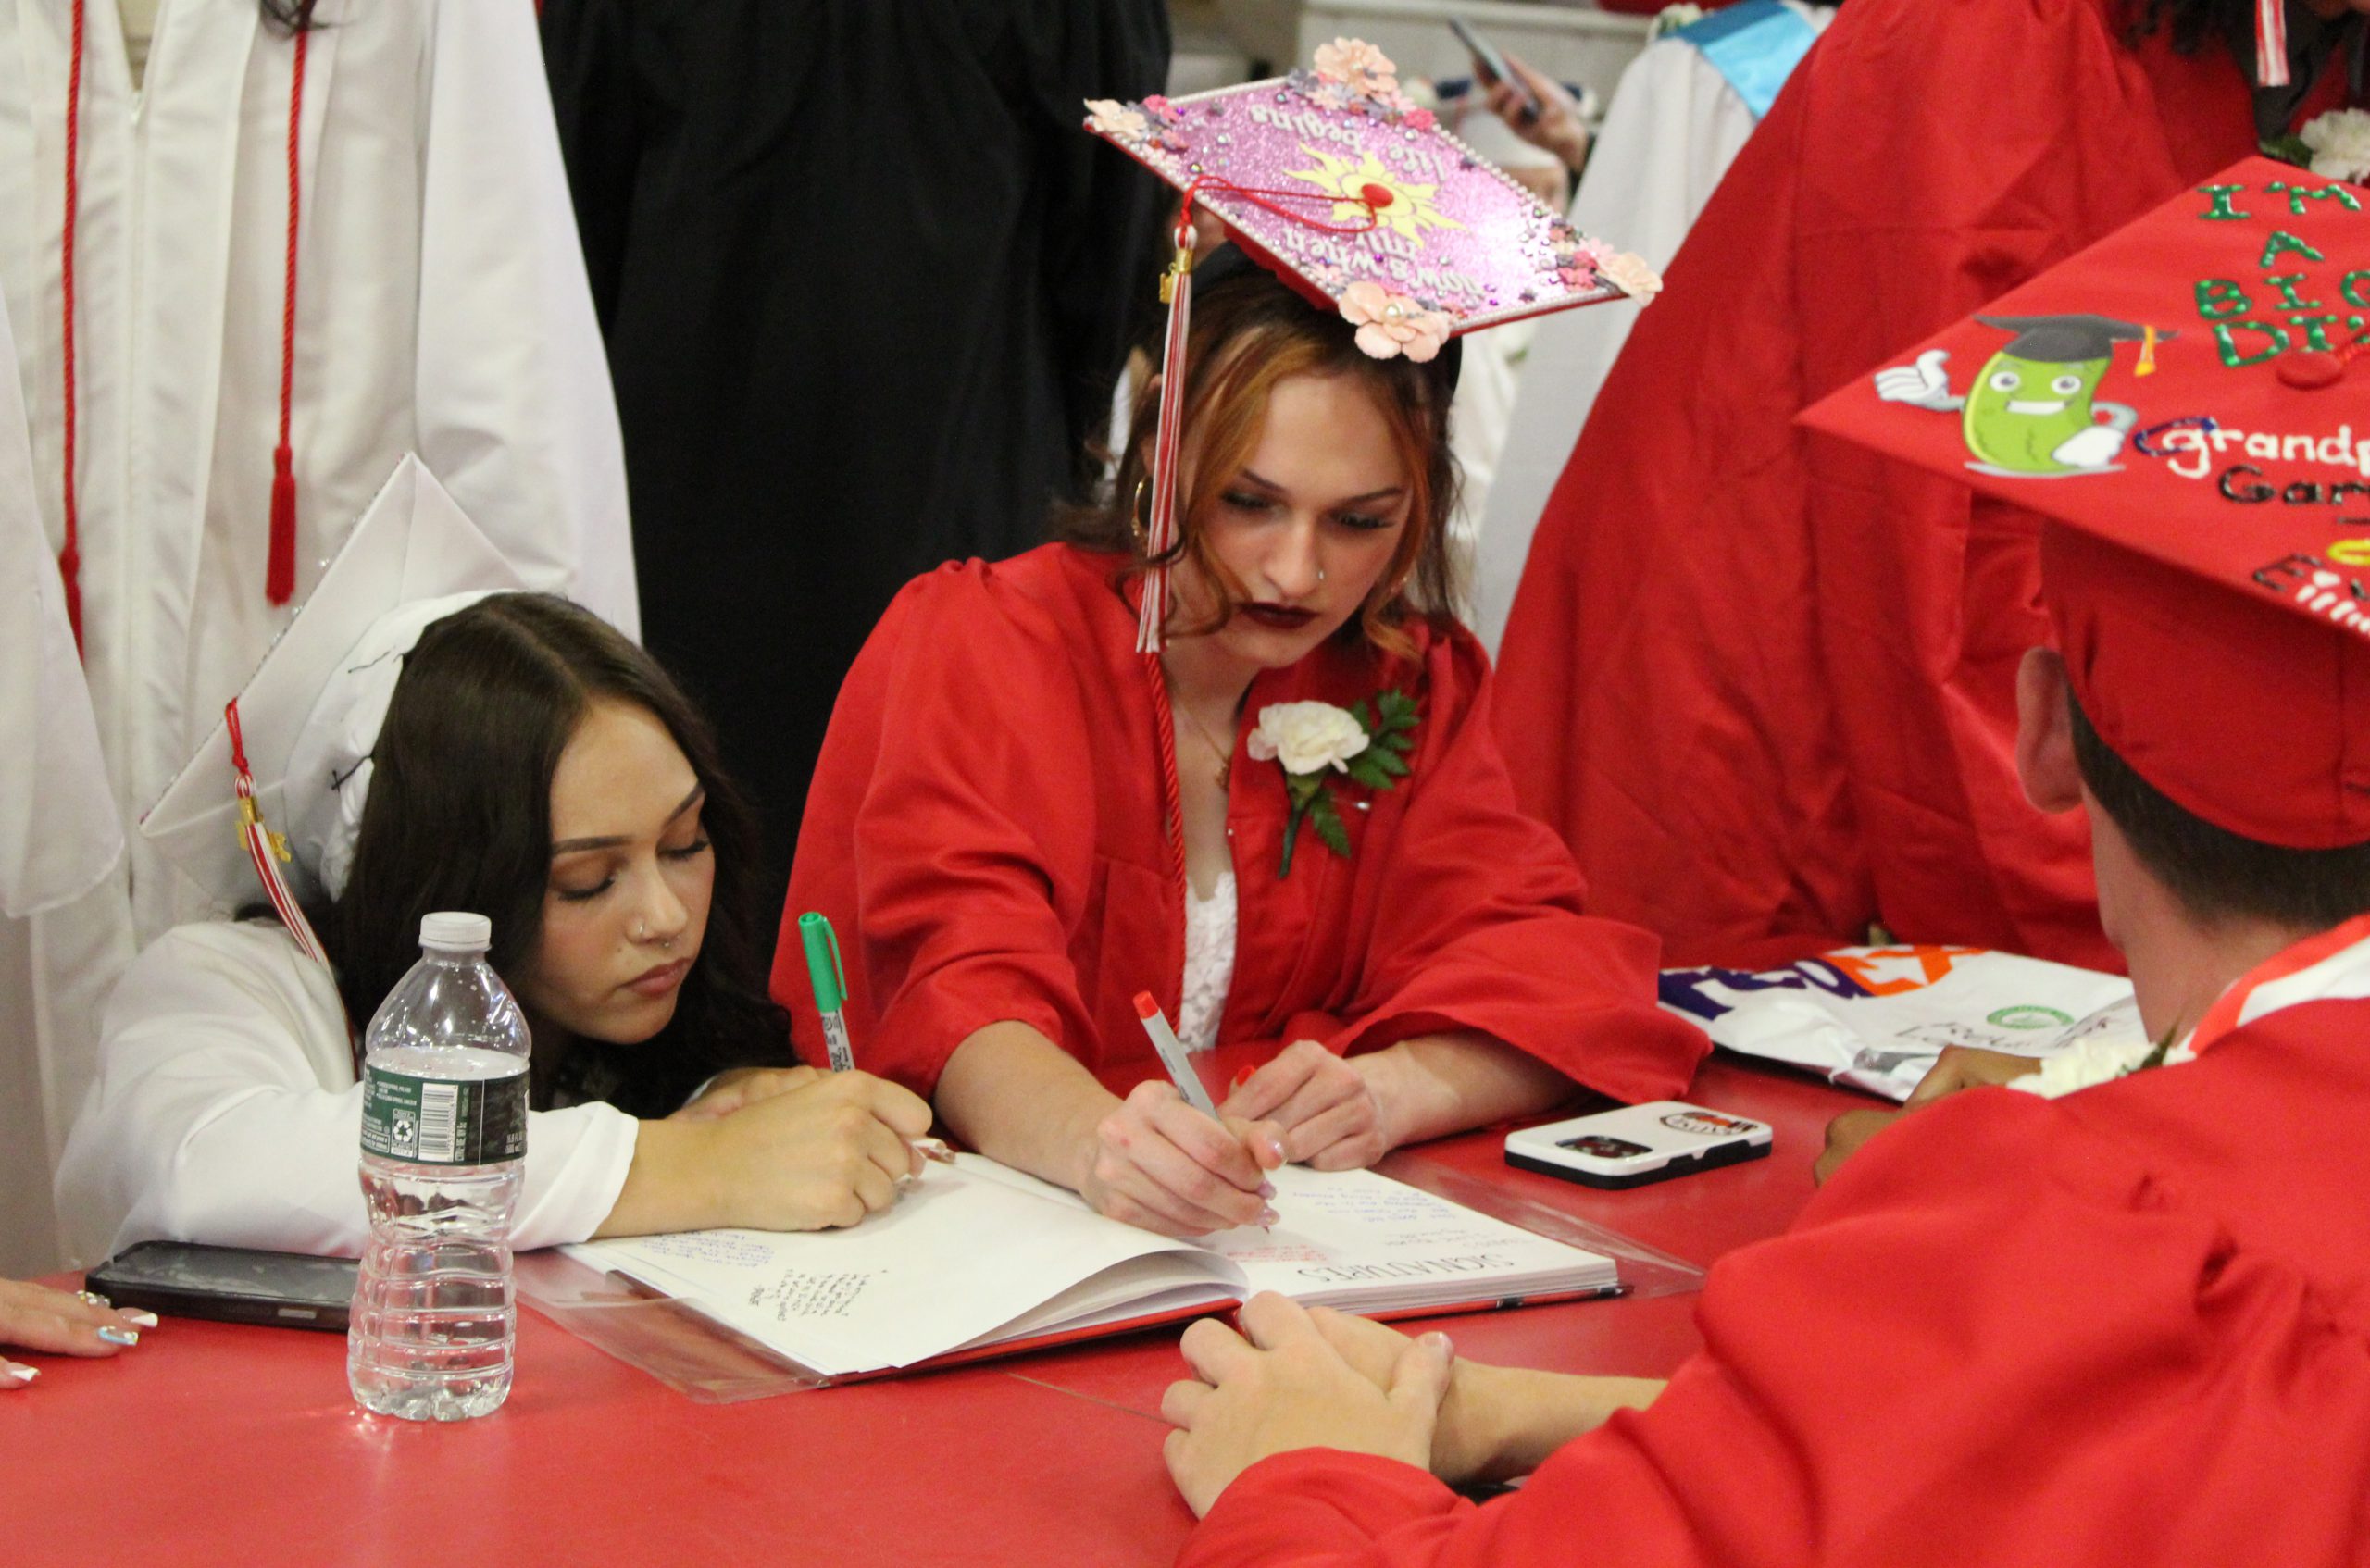 Two students sign a yearbook